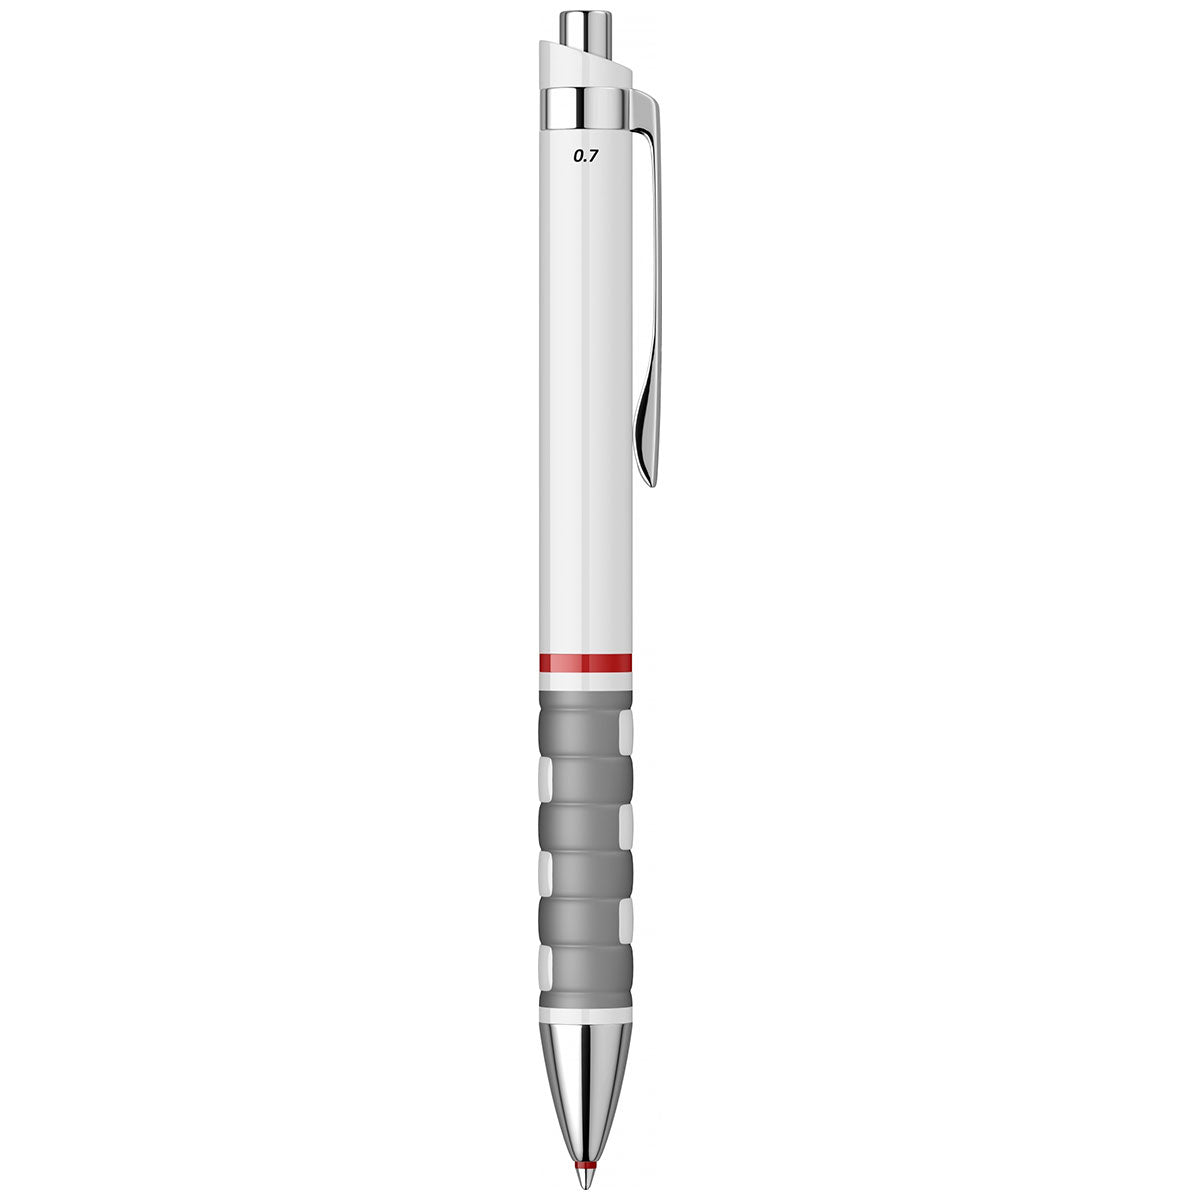 Rotring Tikky 3 in 1 Multi Pen Blue and Red ink and 0.7mm Mechanical Pencil, White Barrel 1904452